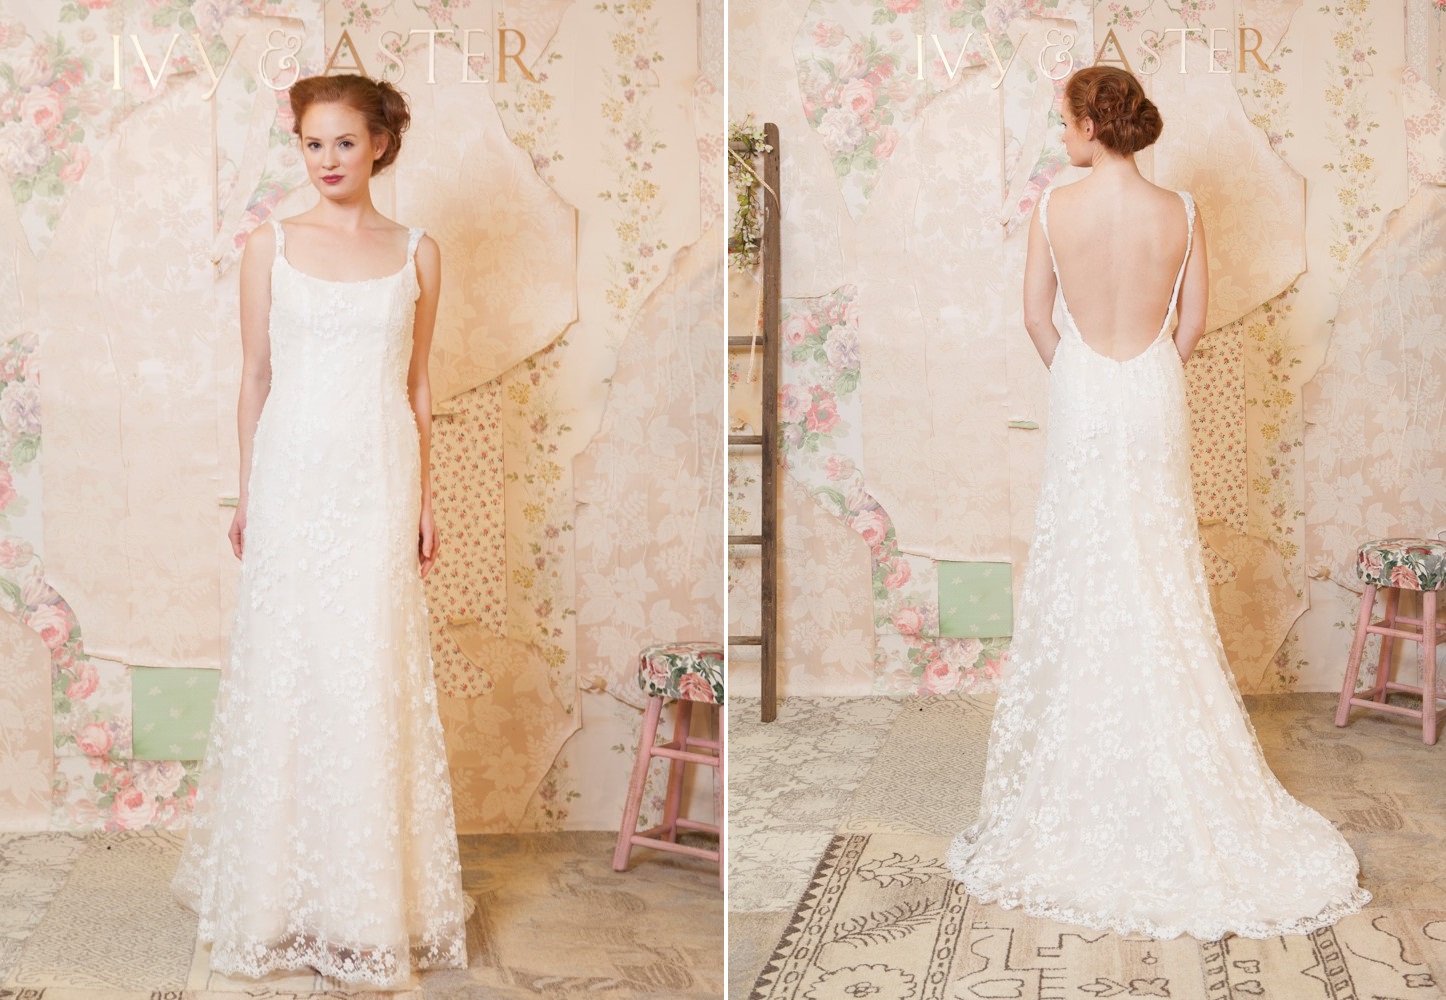 My Darling - 'Through the Flowers' Ivy & Aster's Charming Spring 2016 Bridal Collection